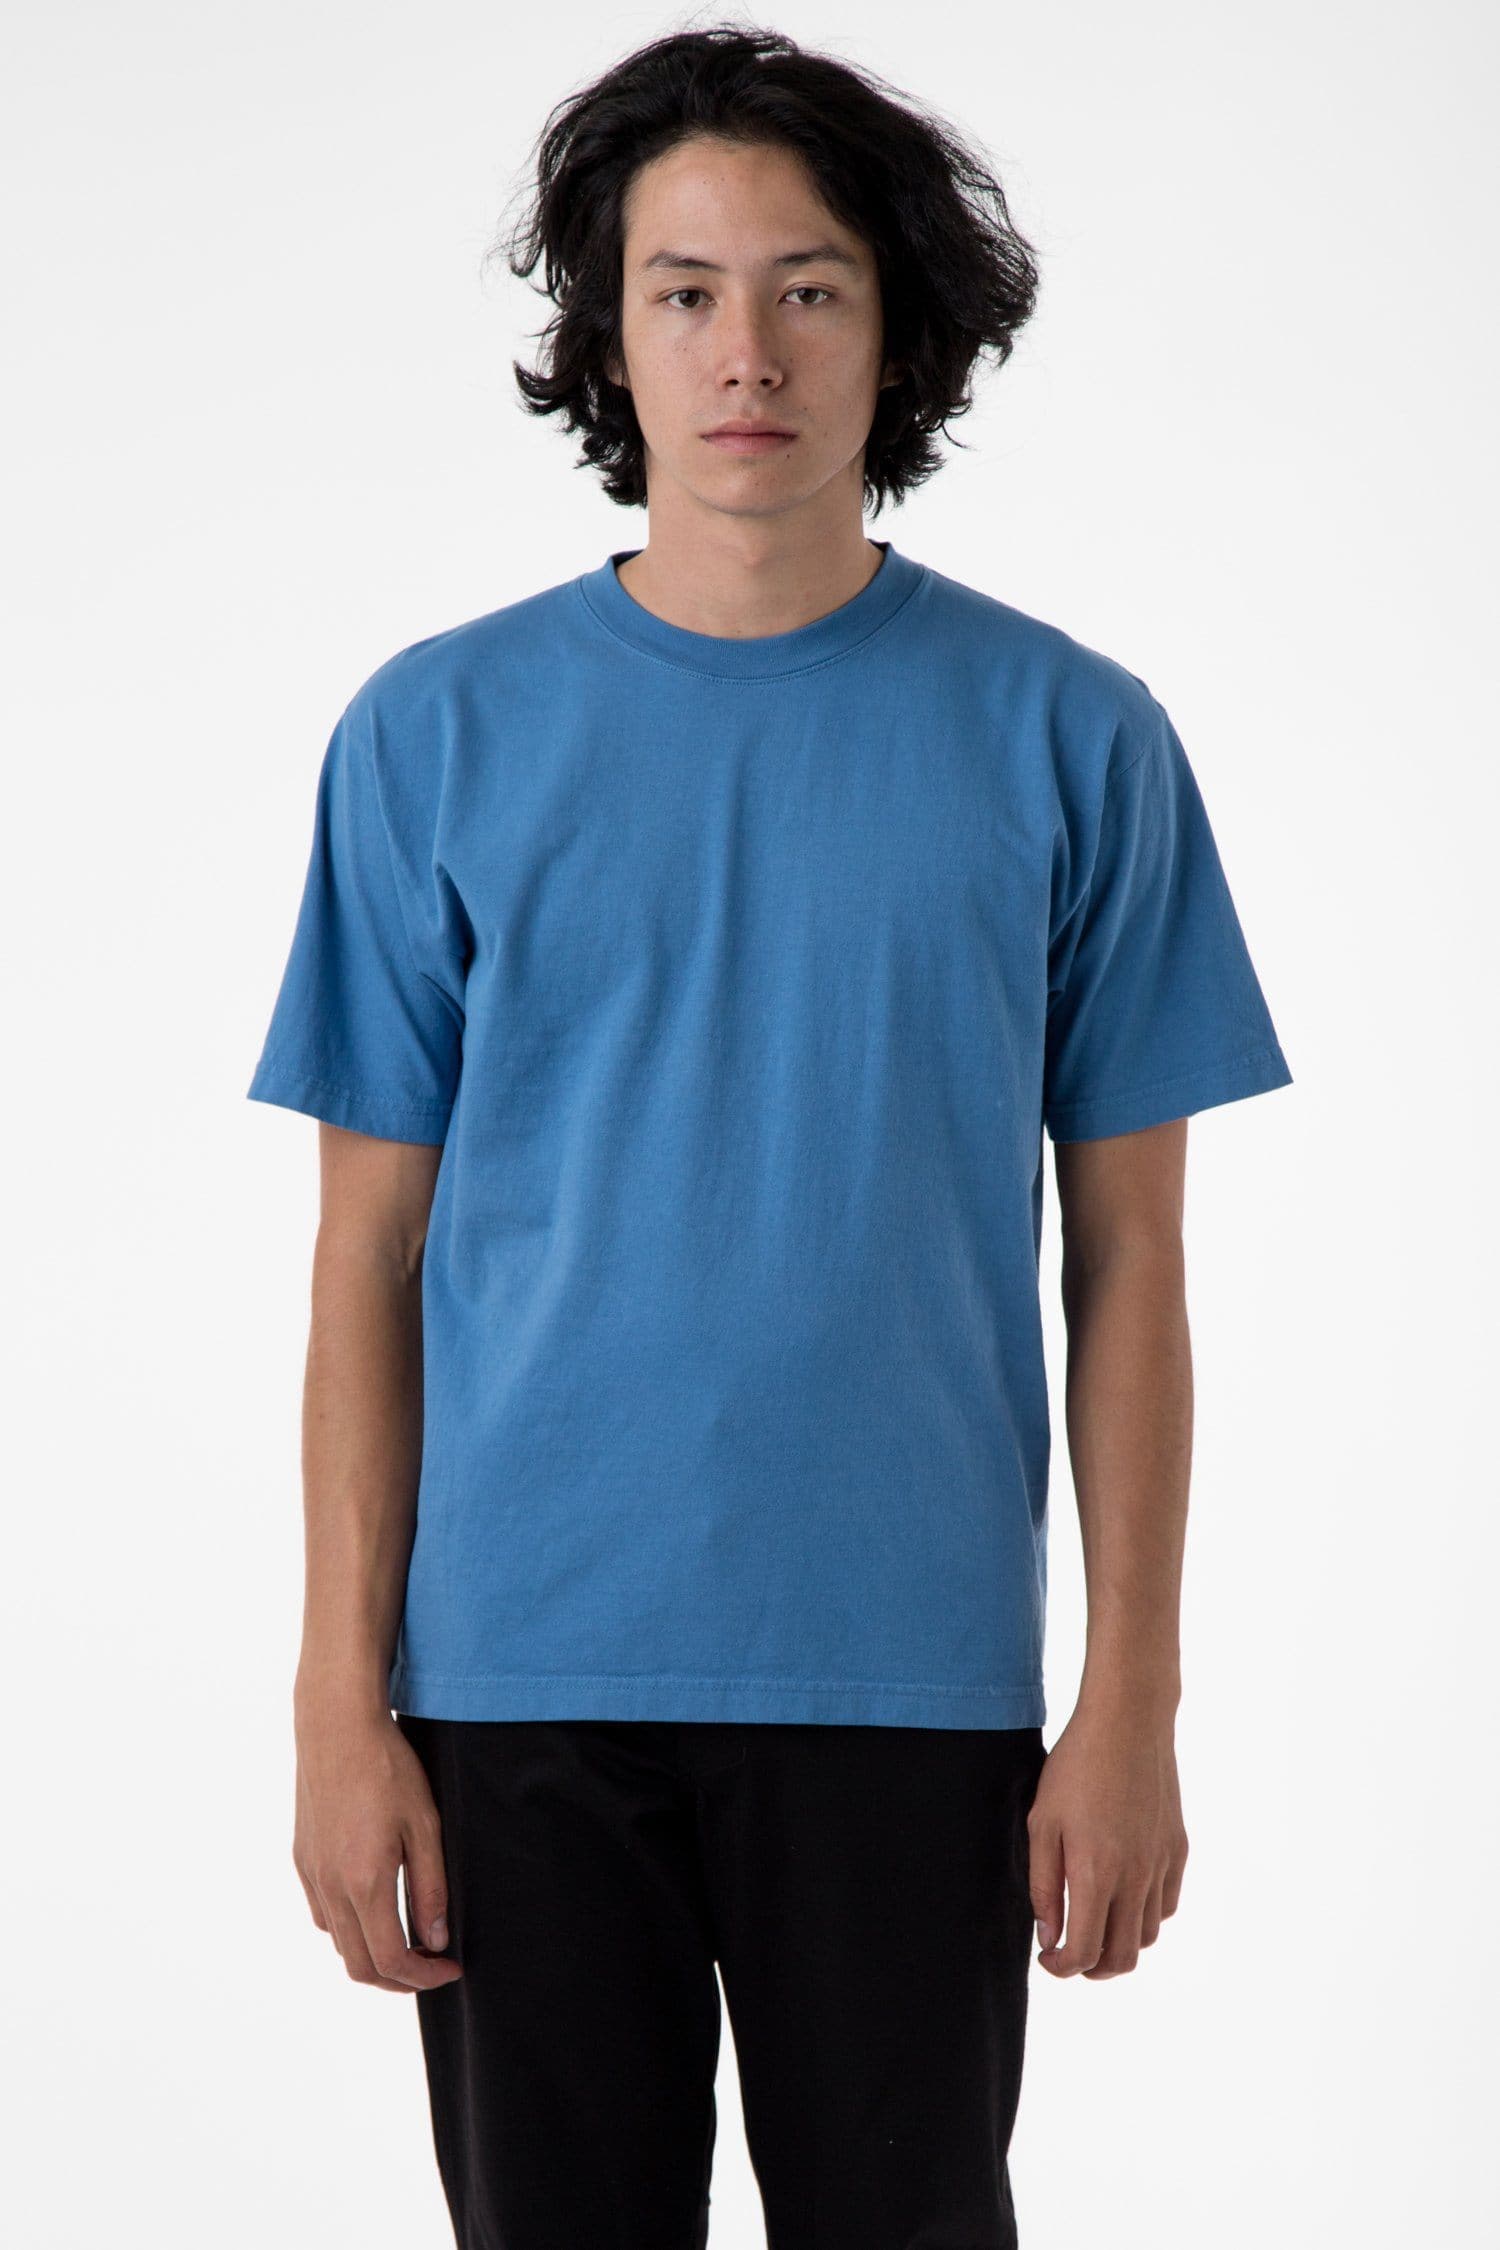 Los Angeles Apparel | The 1801 | Shirt Pigment Dye in Clove, Size Large | Crew Neck